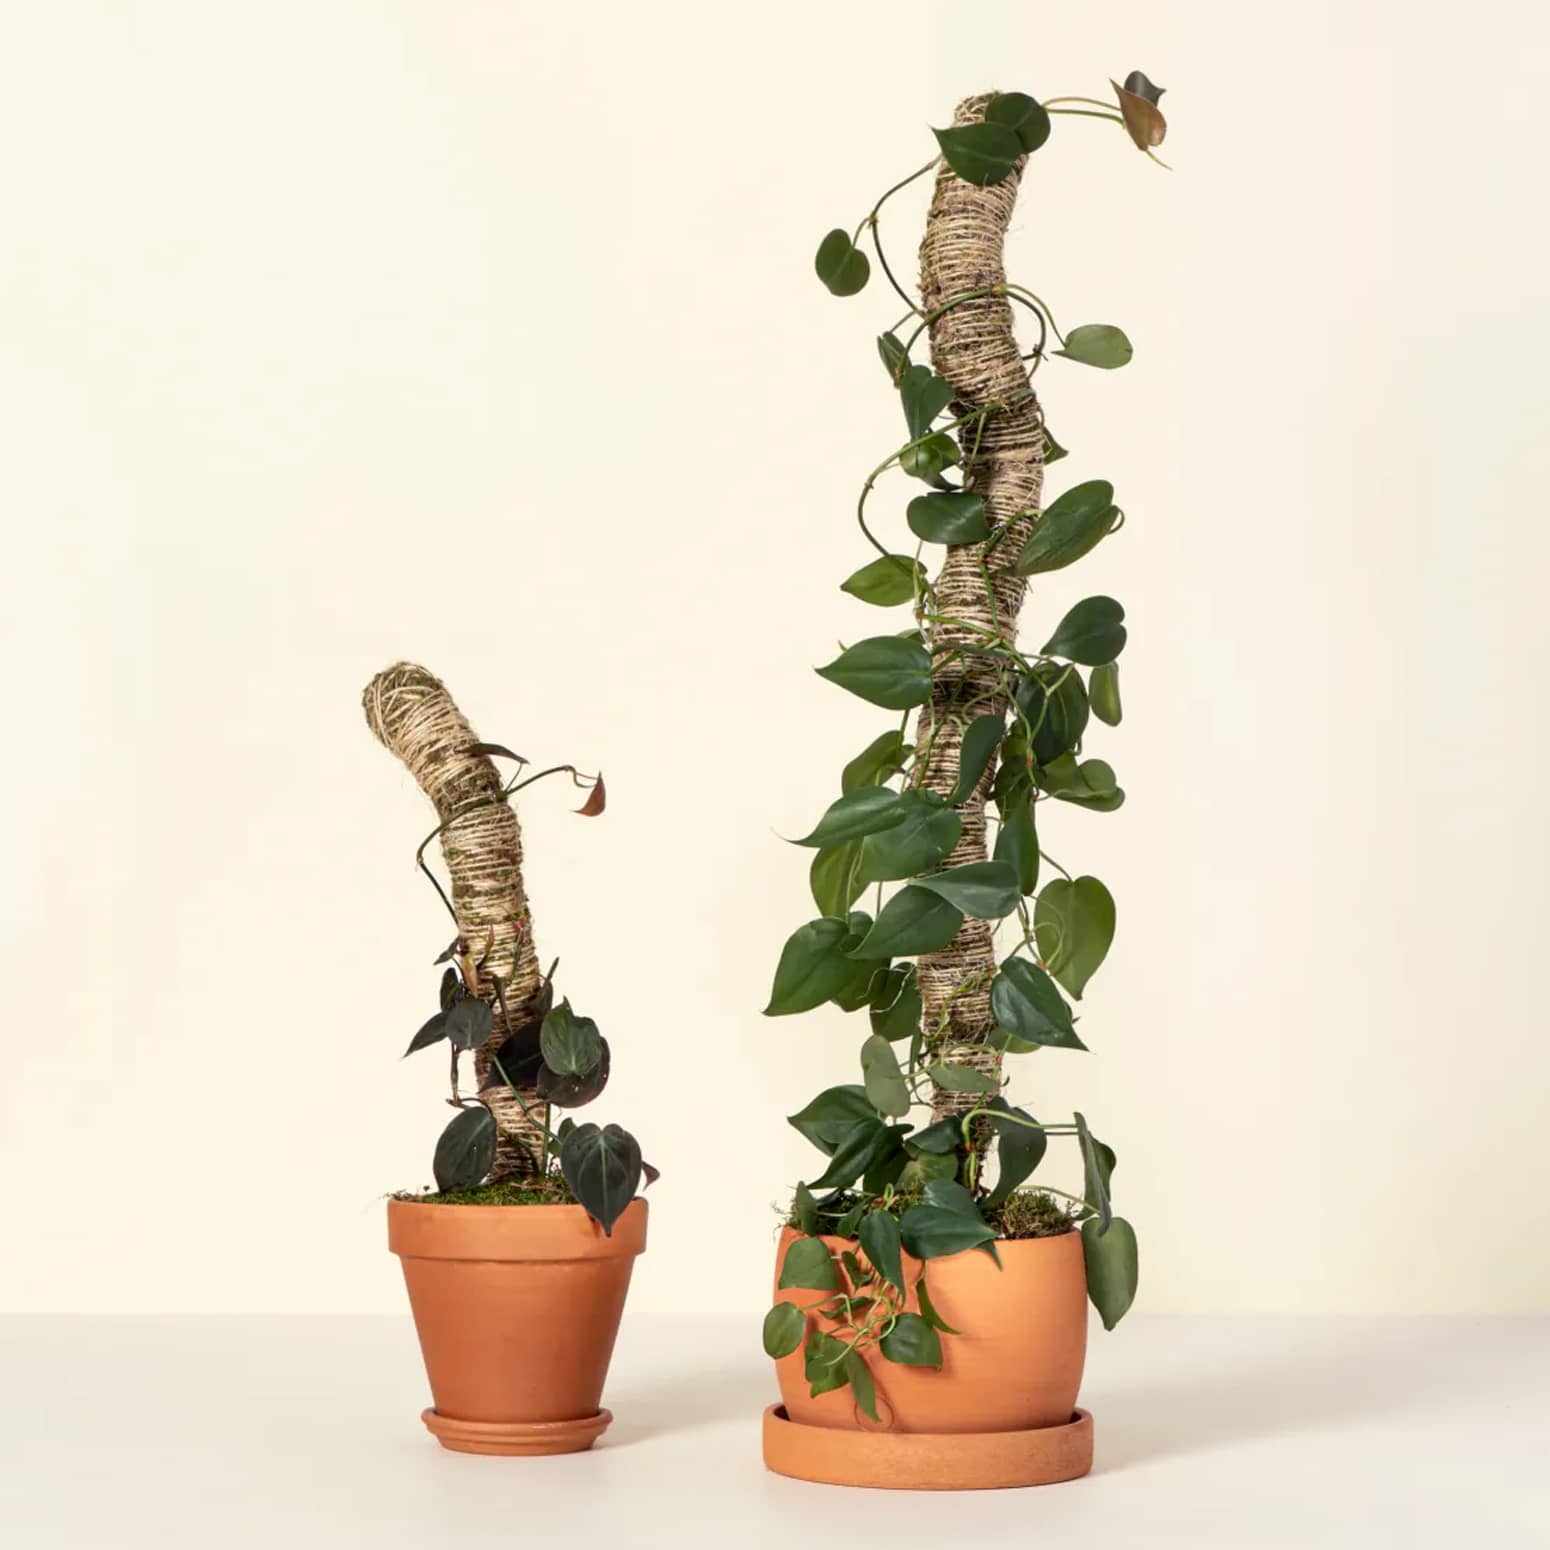 Bendable Moss Poles for Climbing Vines and Plants